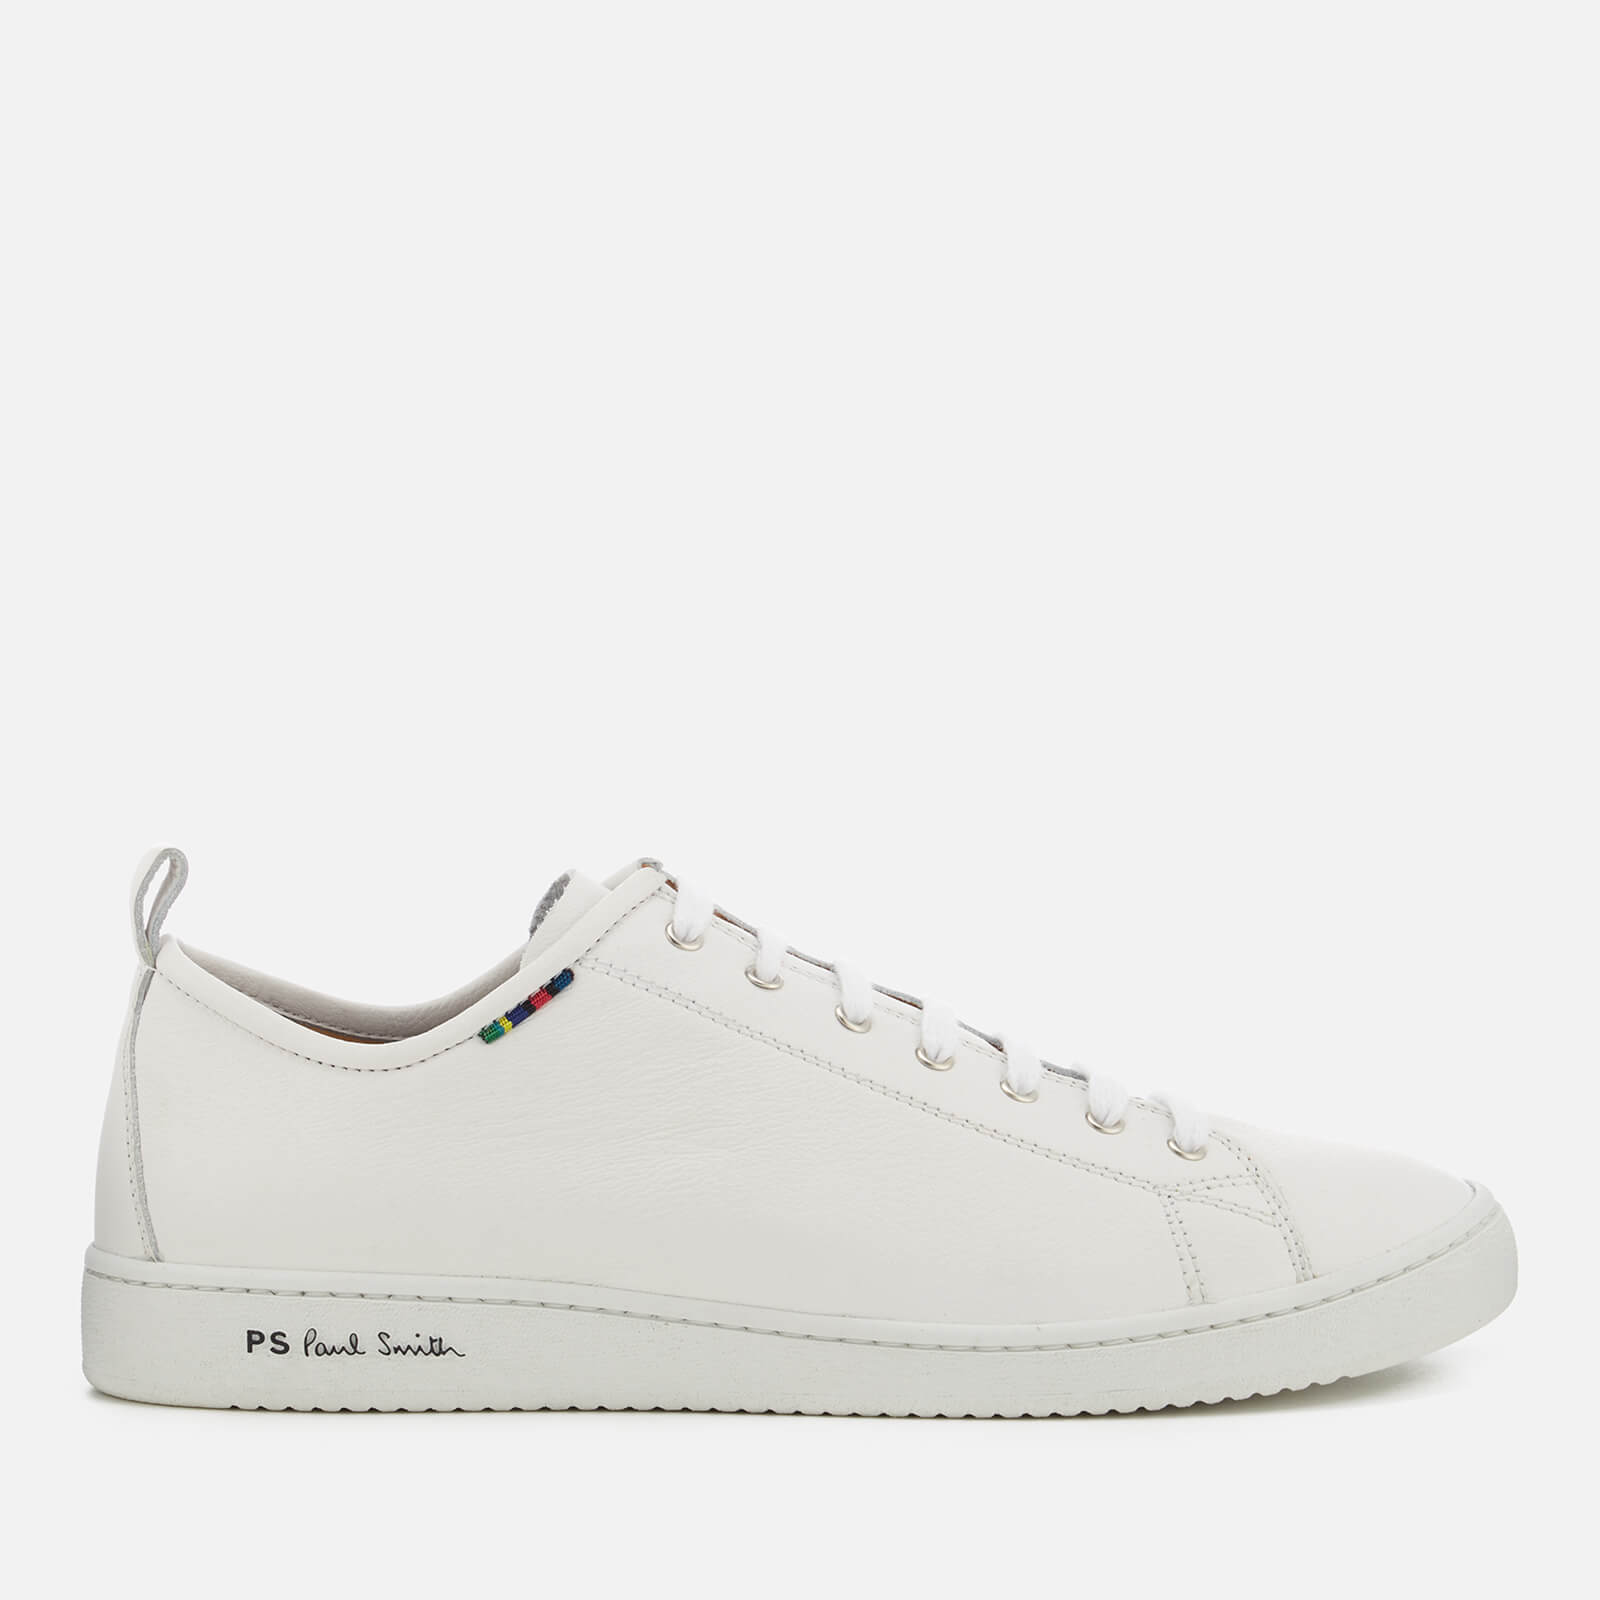 PS Paul Smith Men’s Miyata Leather Low Top Trainers - White